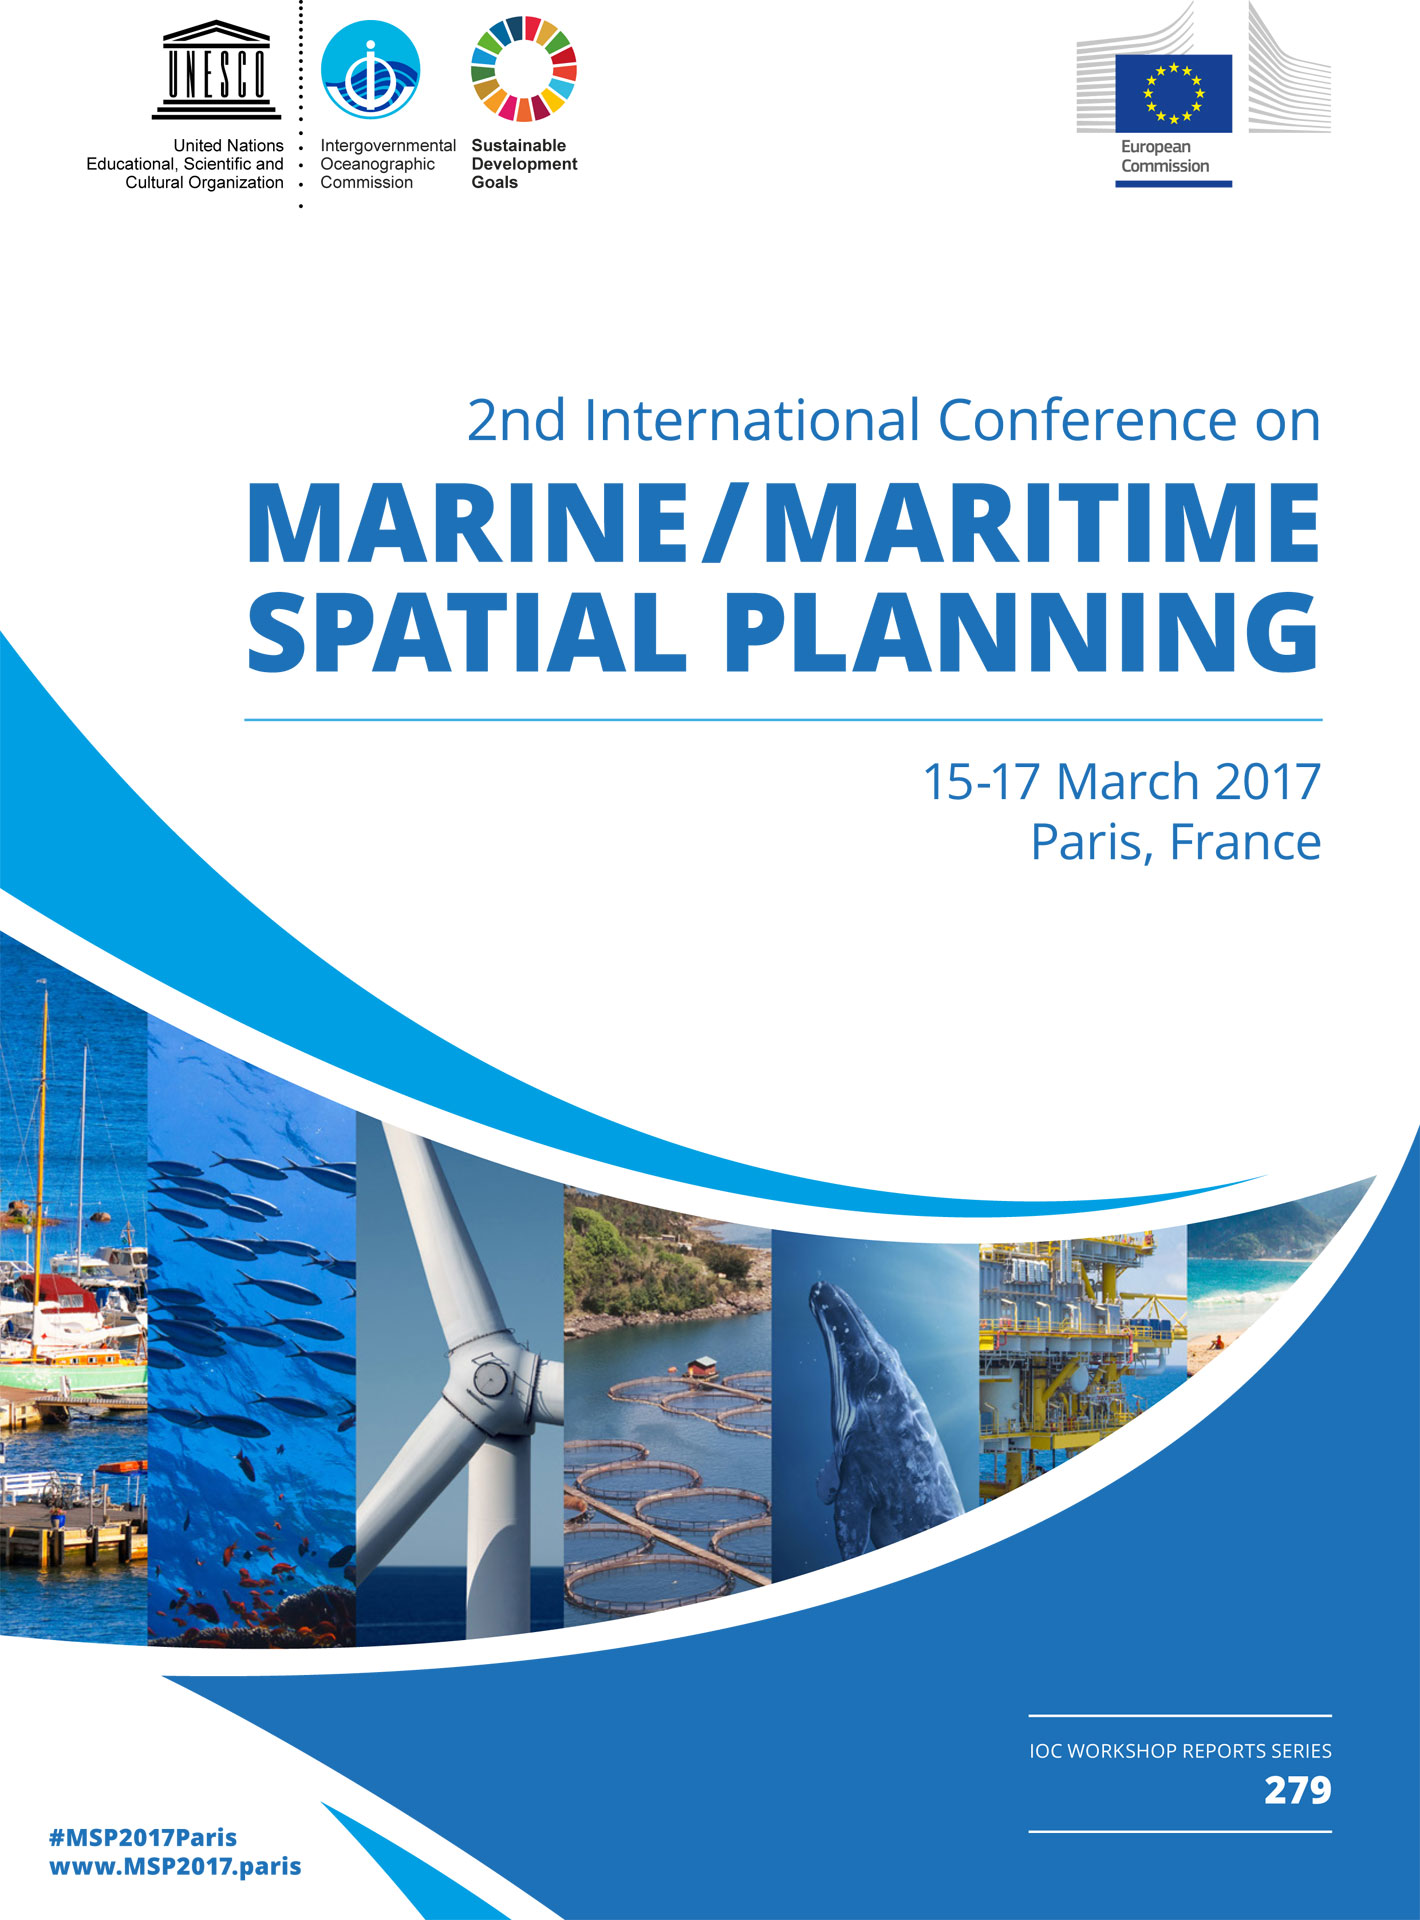 2nd International Conference on Marine/Maritime Spatial Planning, 15-17 March 2017, Paris, France